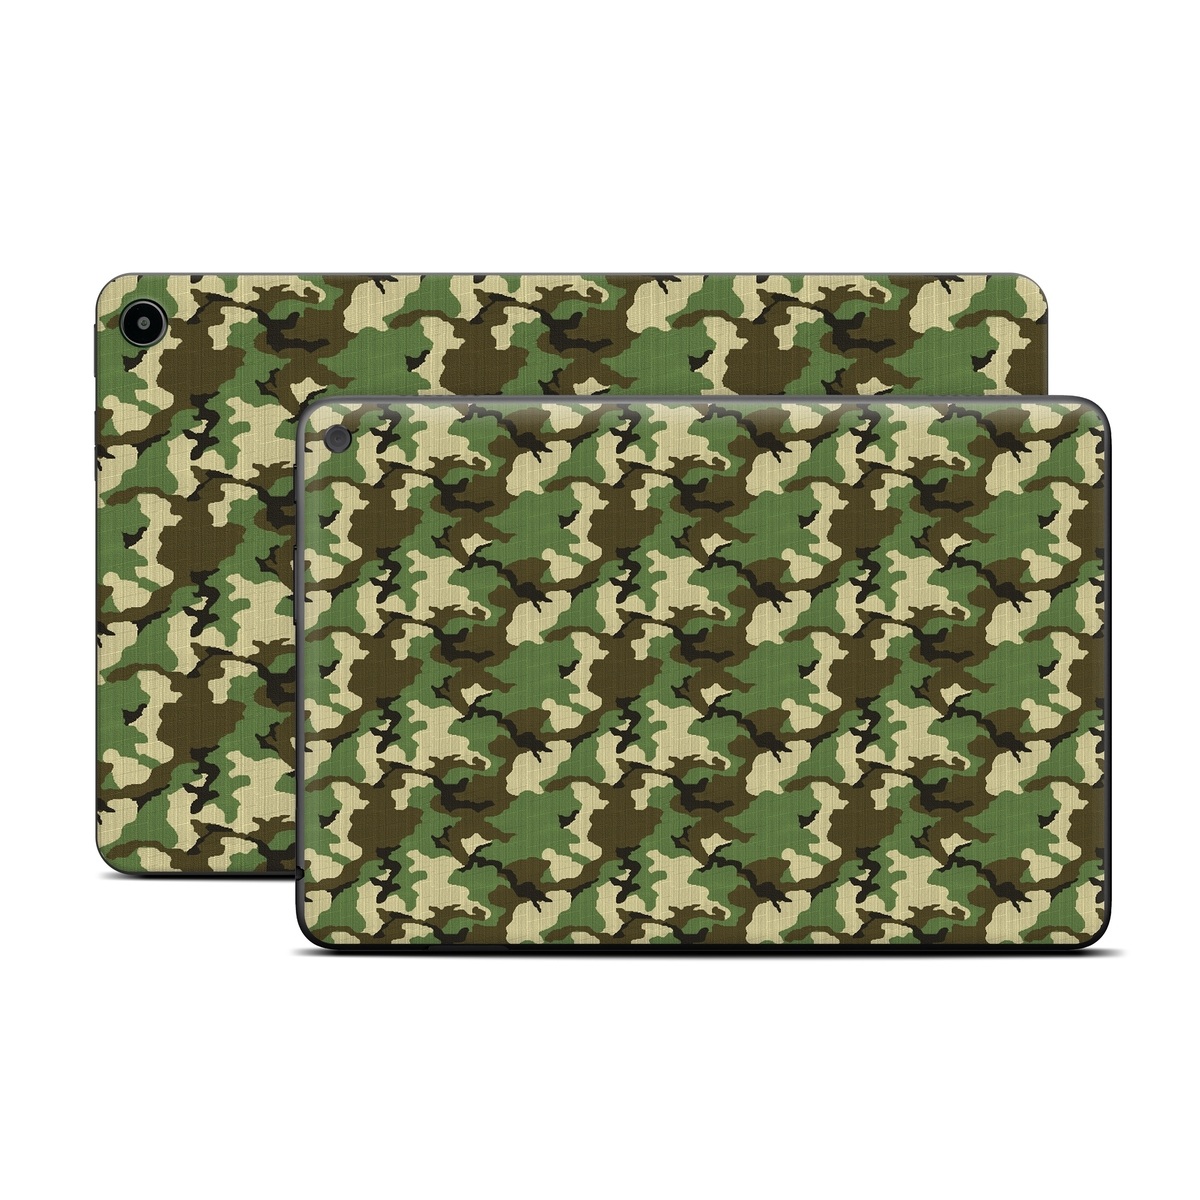 Amazon Fire Tablet Series Skin Skin design of Military camouflage, Camouflage, Clothing, Pattern, Green, Uniform, Military uniform, Design, Sportswear, Plane, with black, gray, green colors